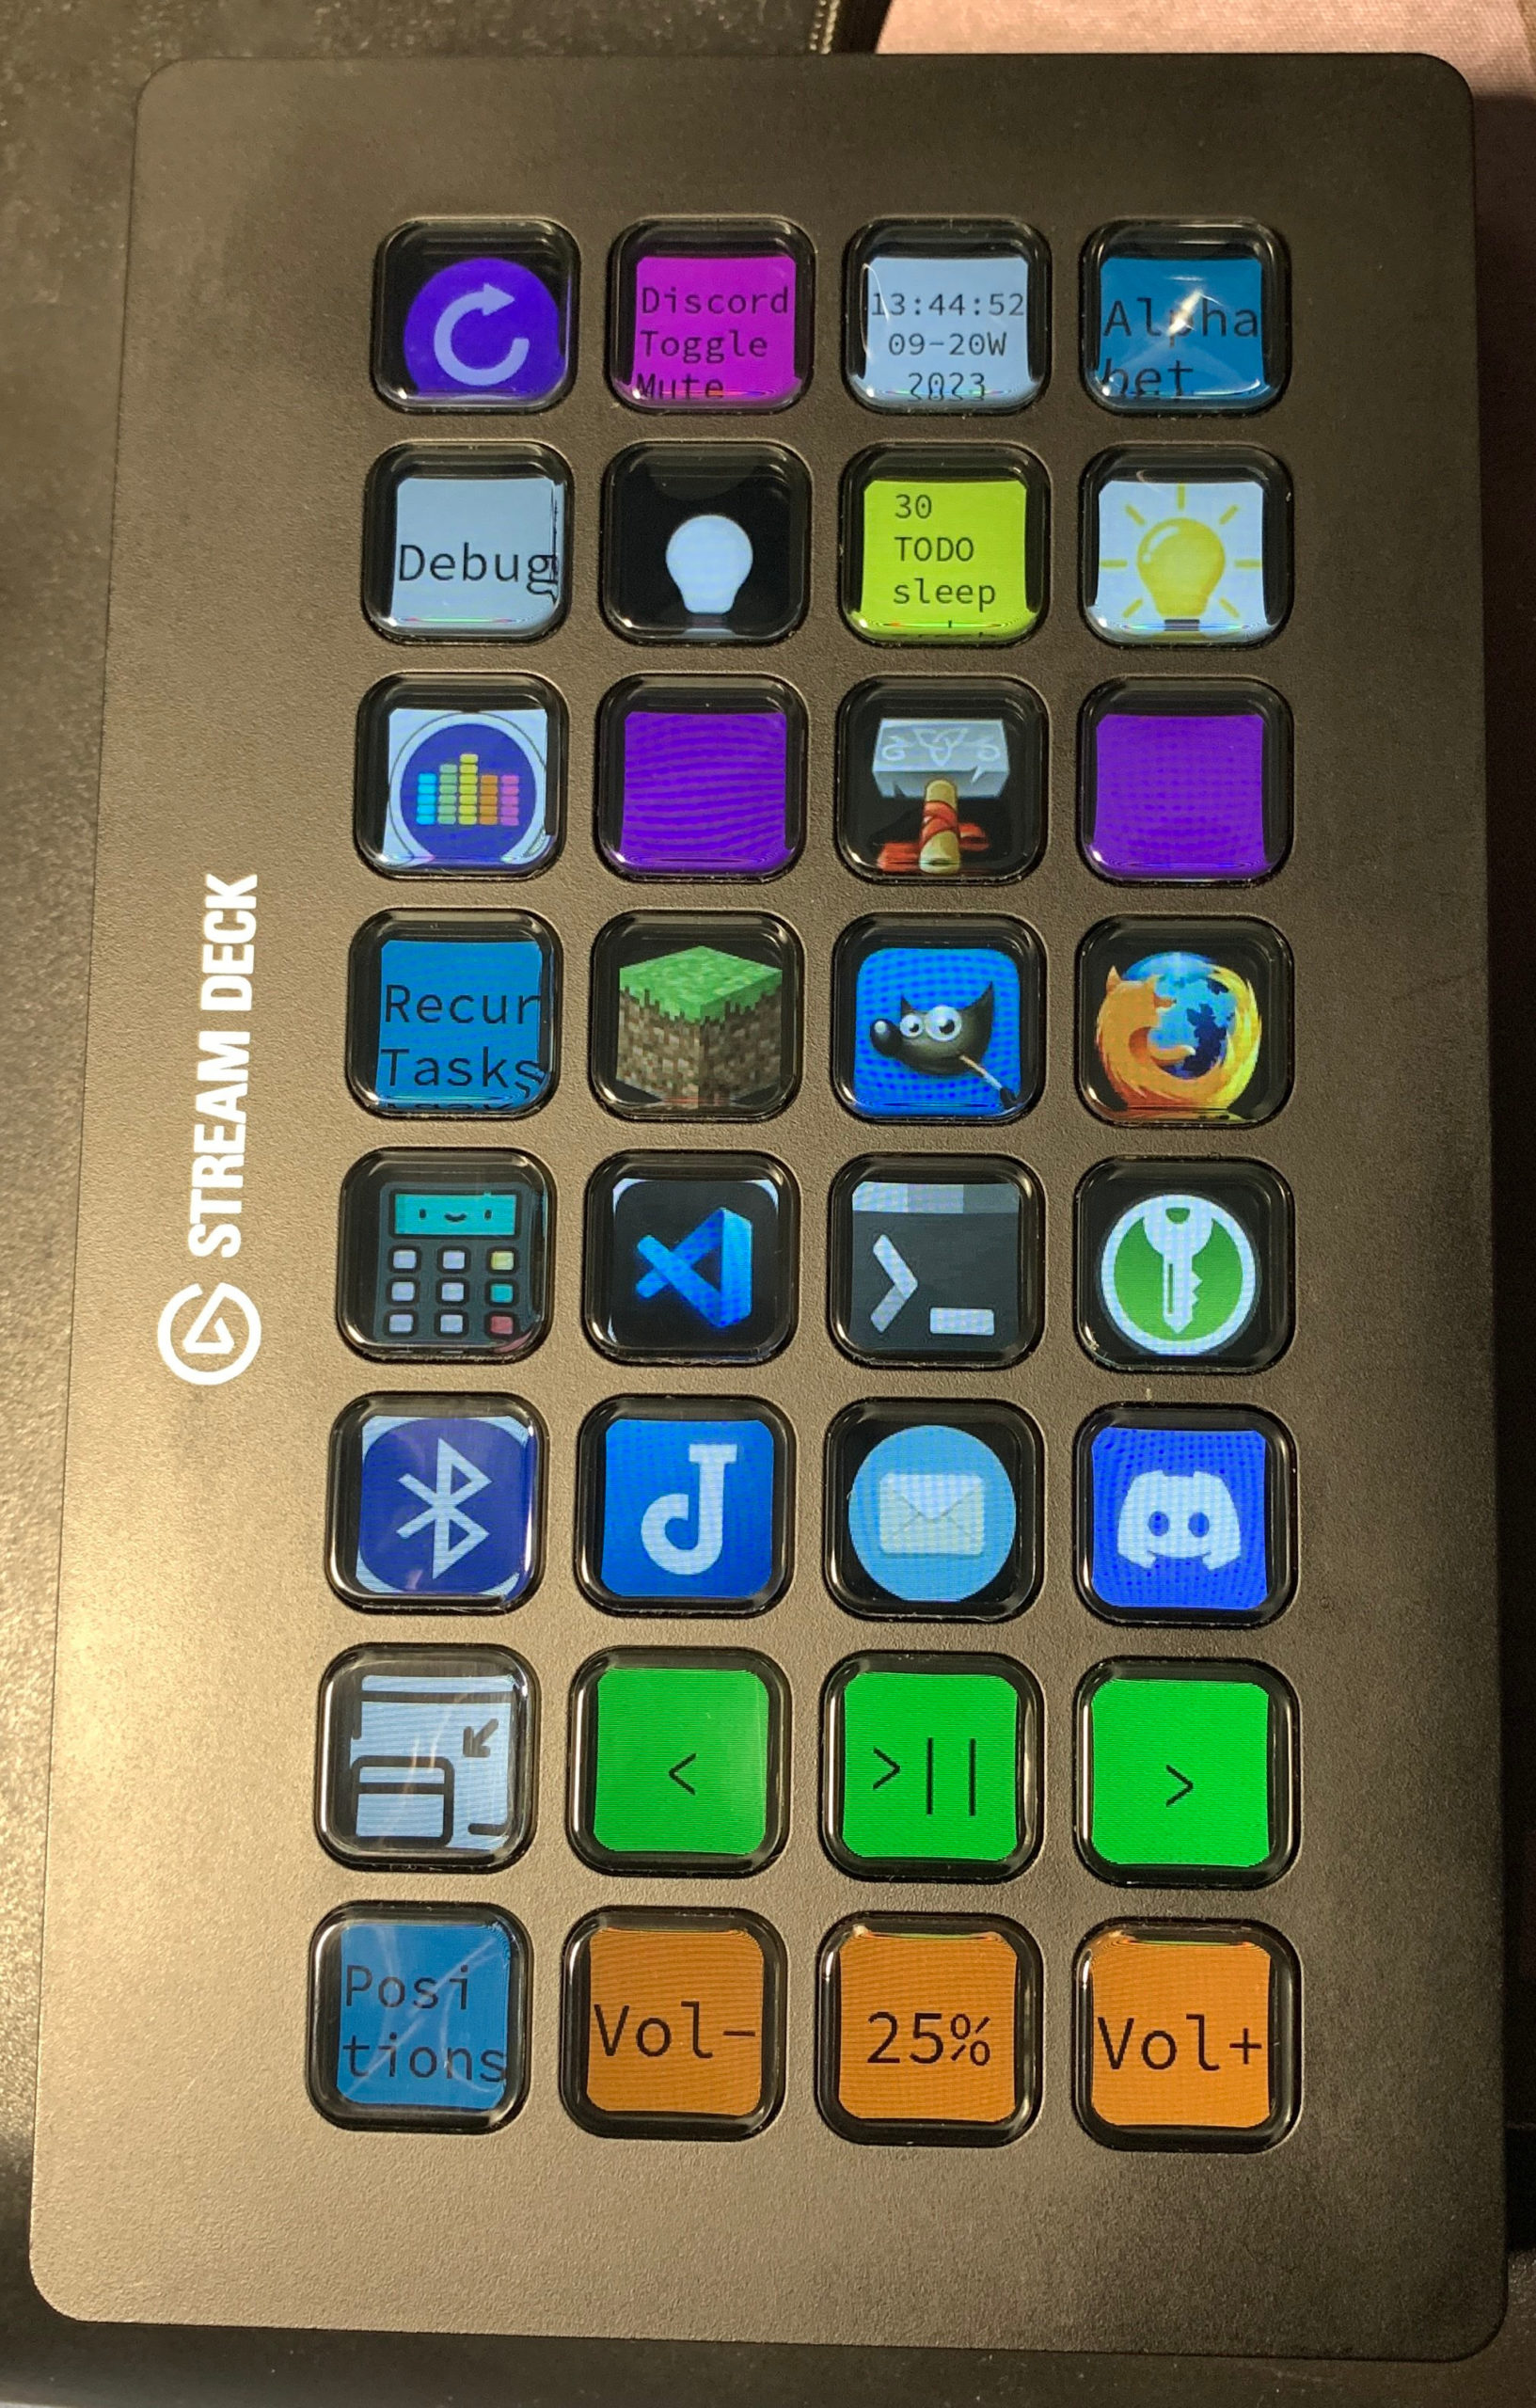 Stream Deck flipped 90 degrees clockwise showing the main page buttons